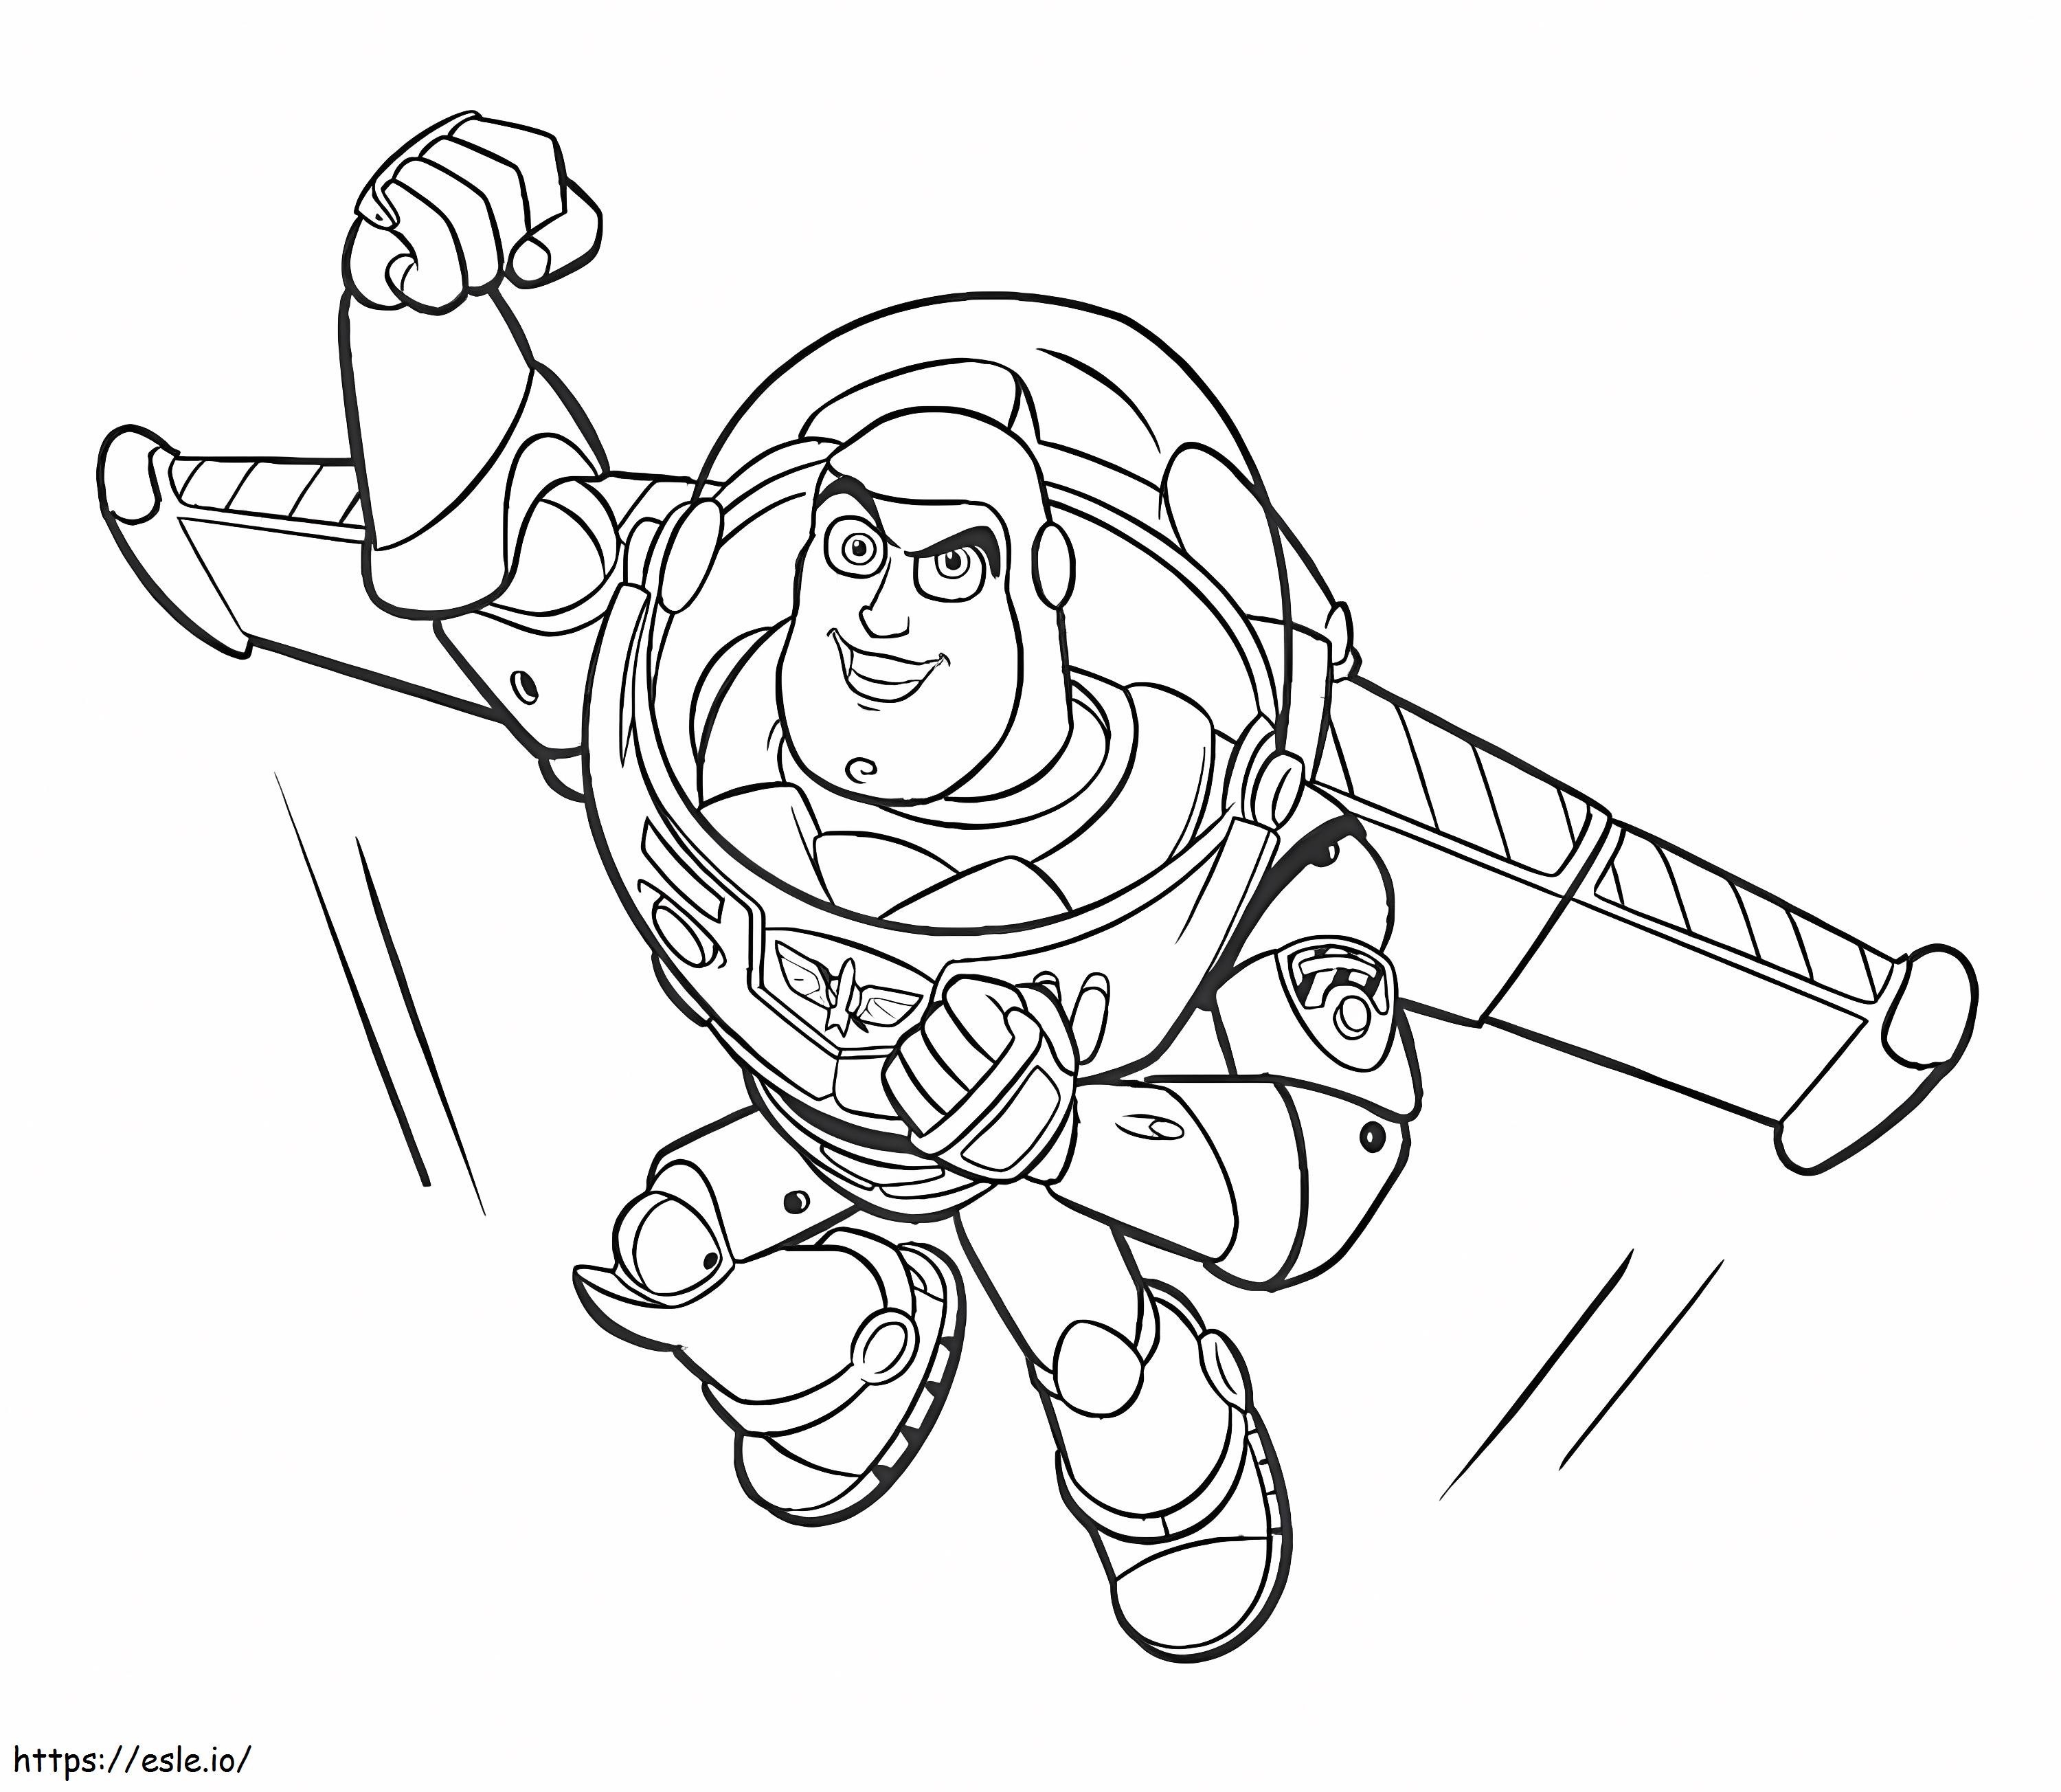 Flying Buzz Lightyear coloring page